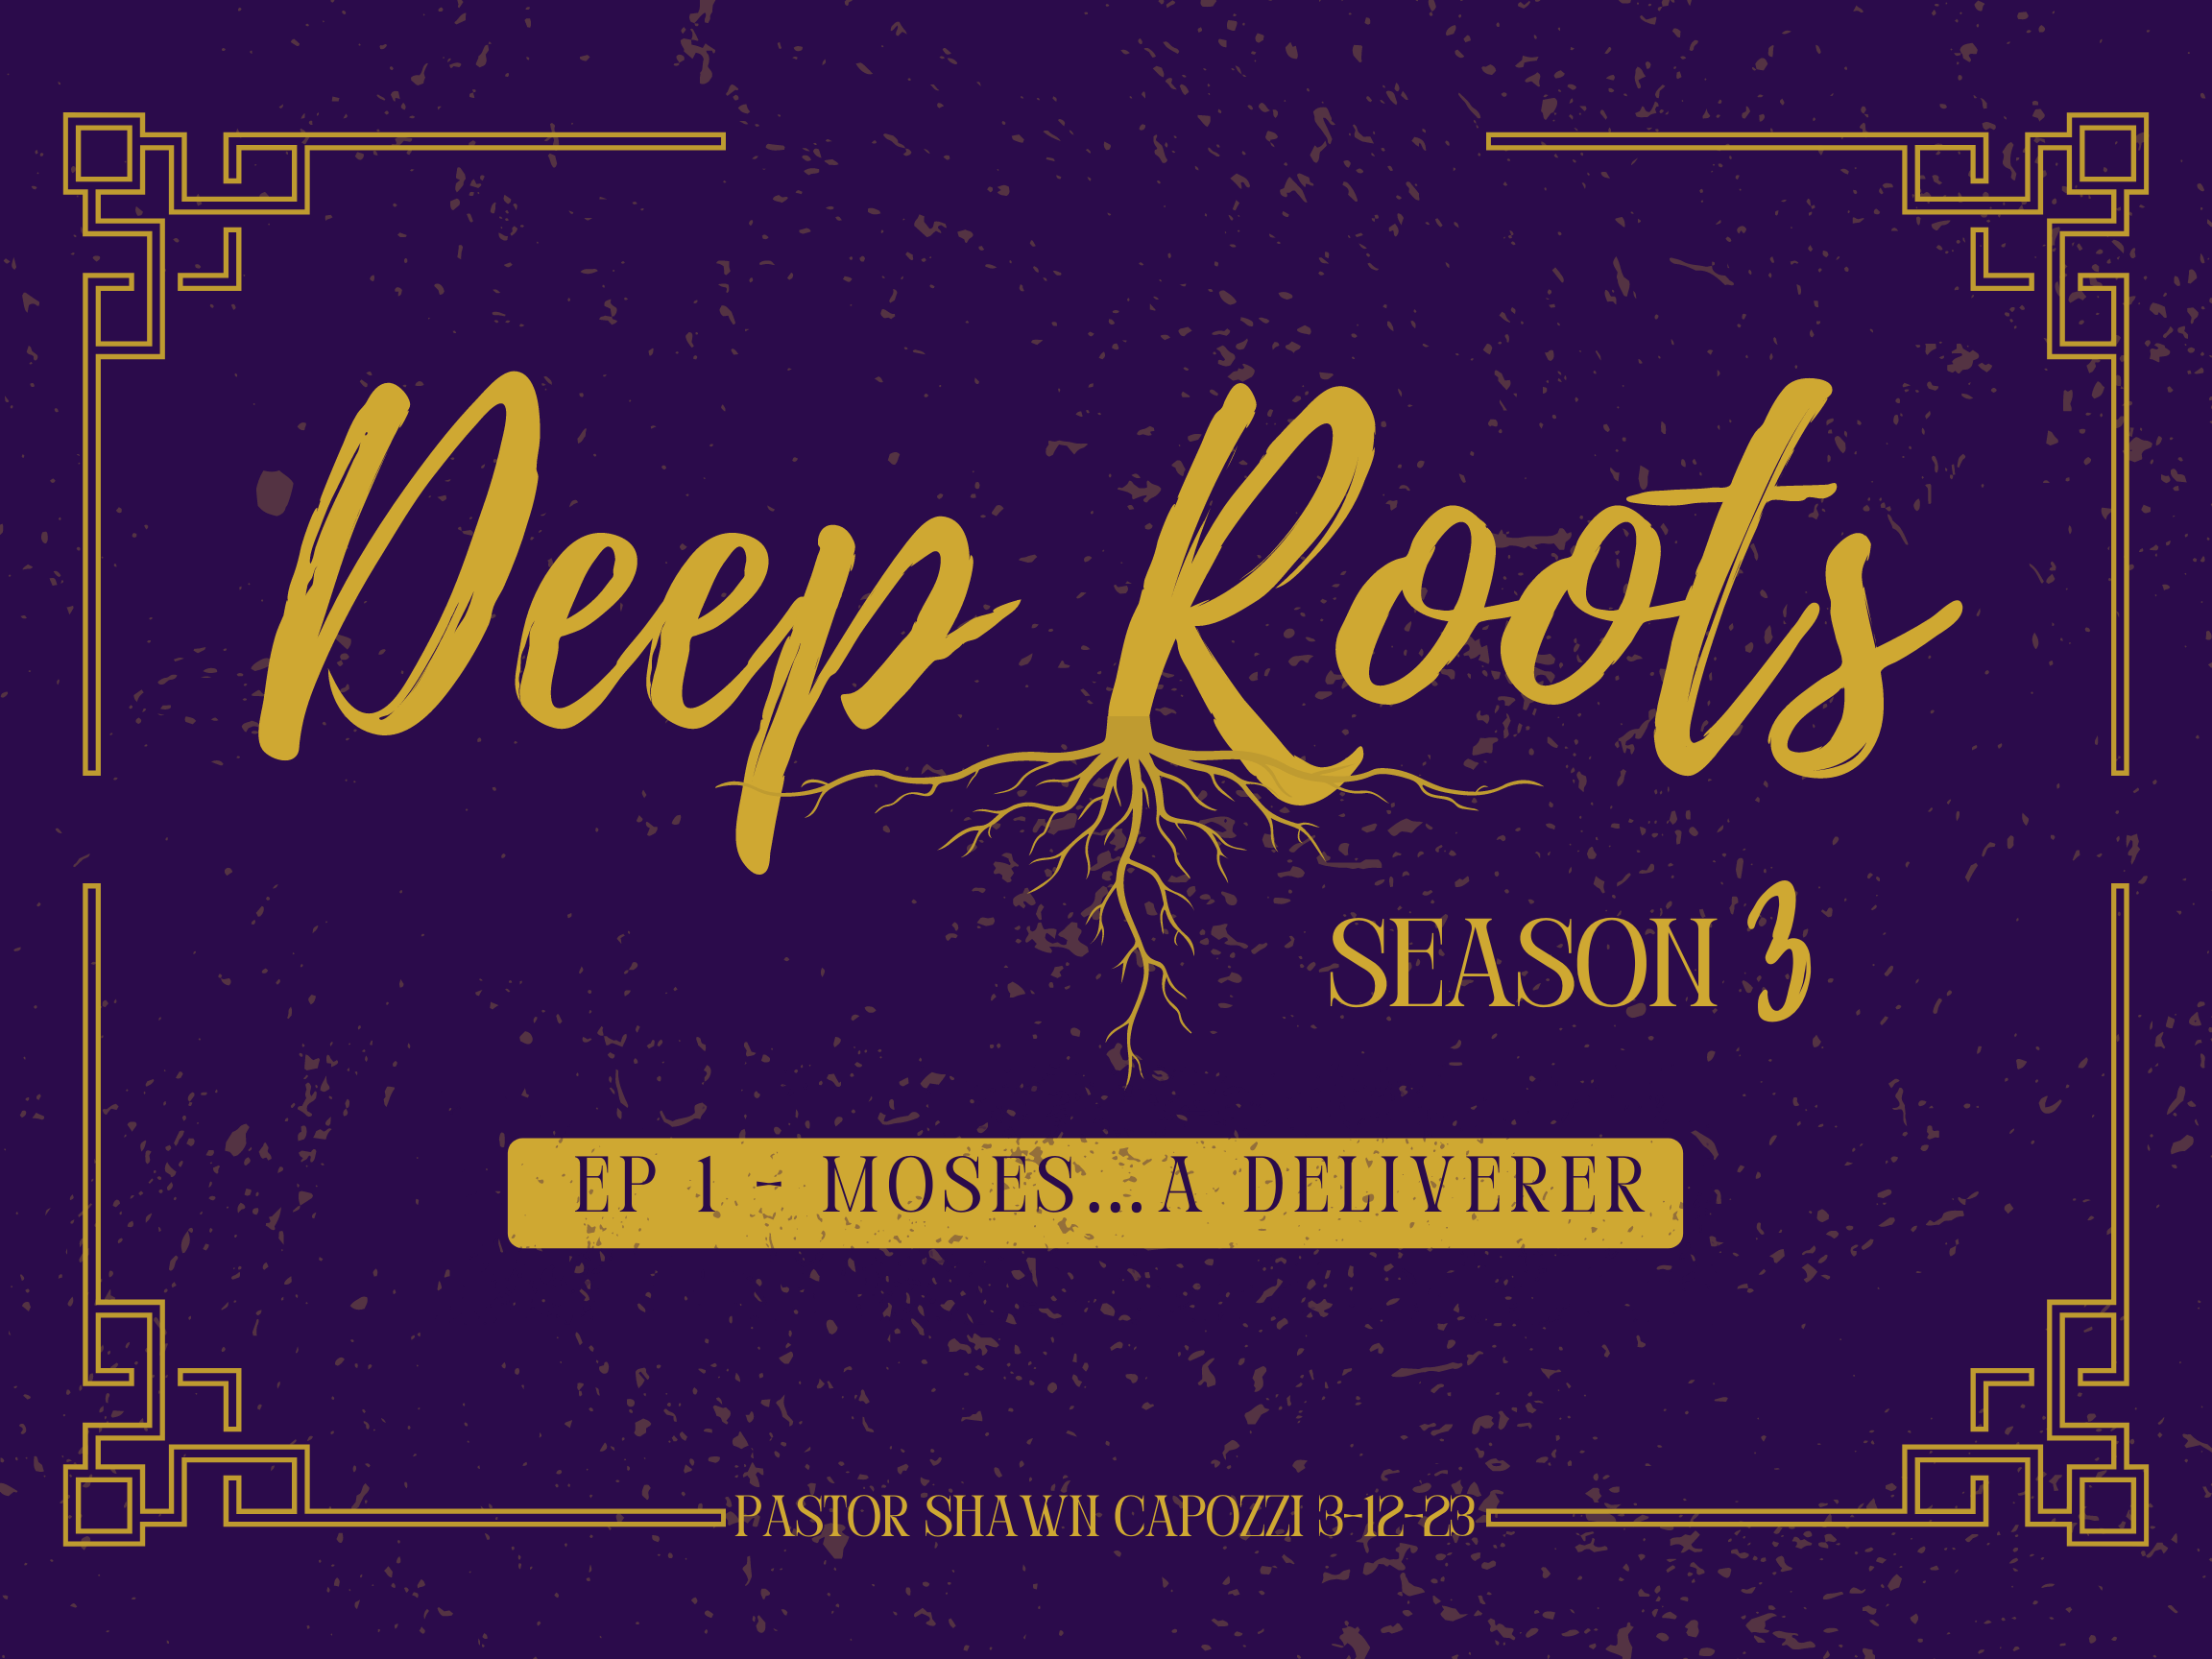 Deep Roots S3E1 Moses the Deliverer